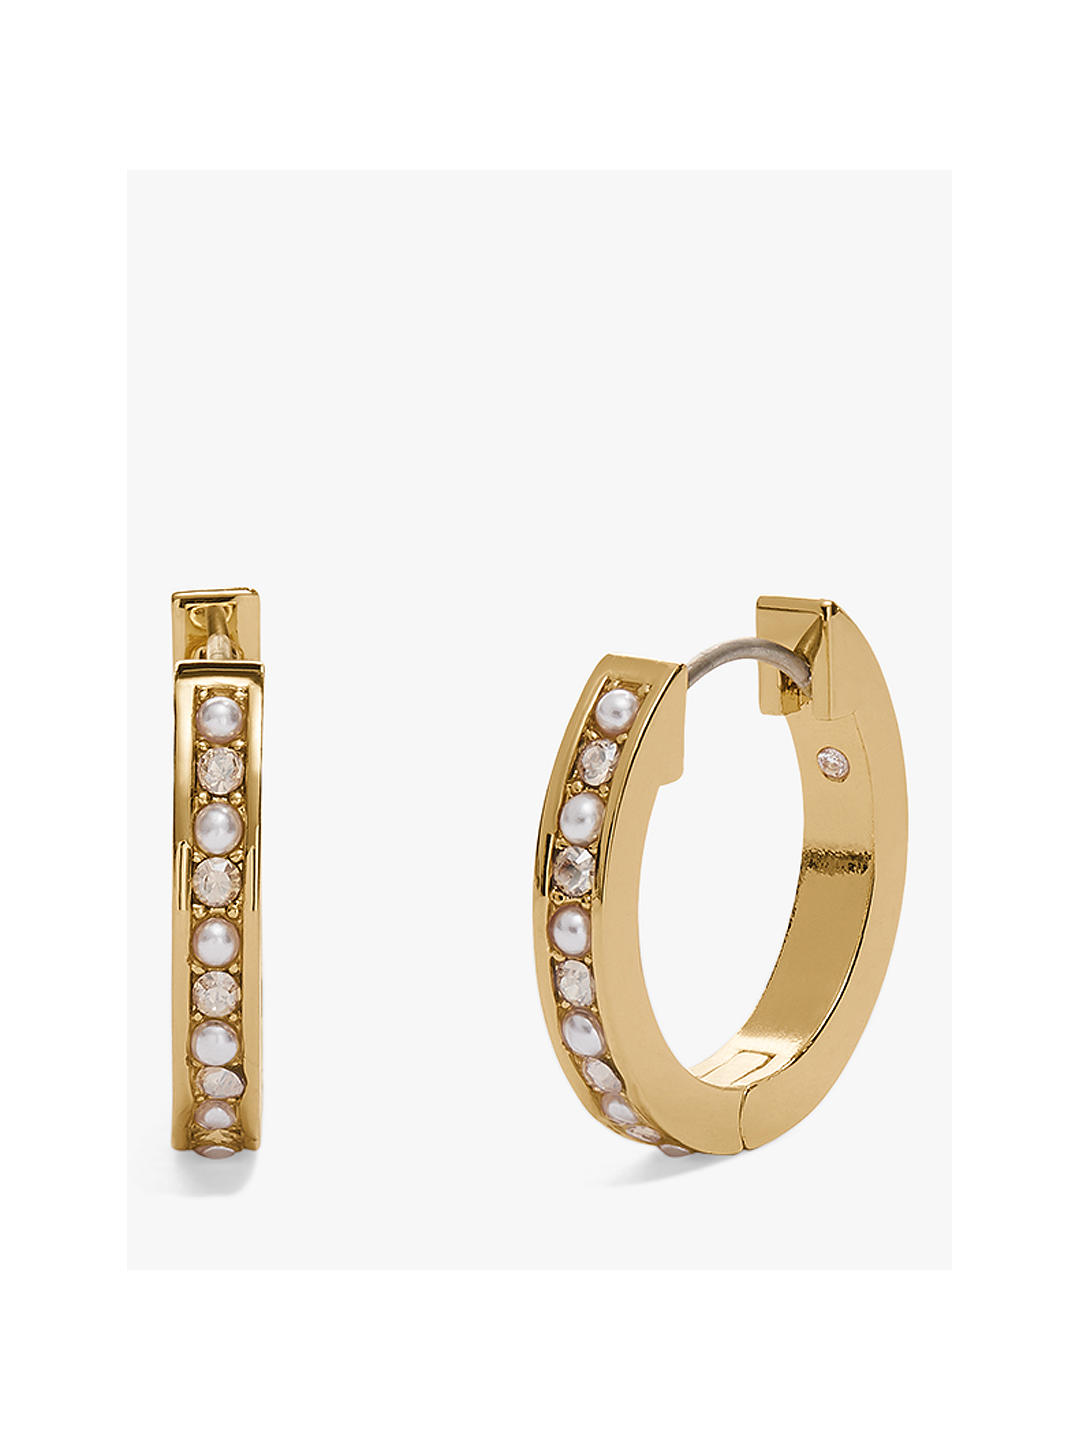 Coach Glass Pearl and Crystal Hoop Earrings, Gold at John Lewis & Partners